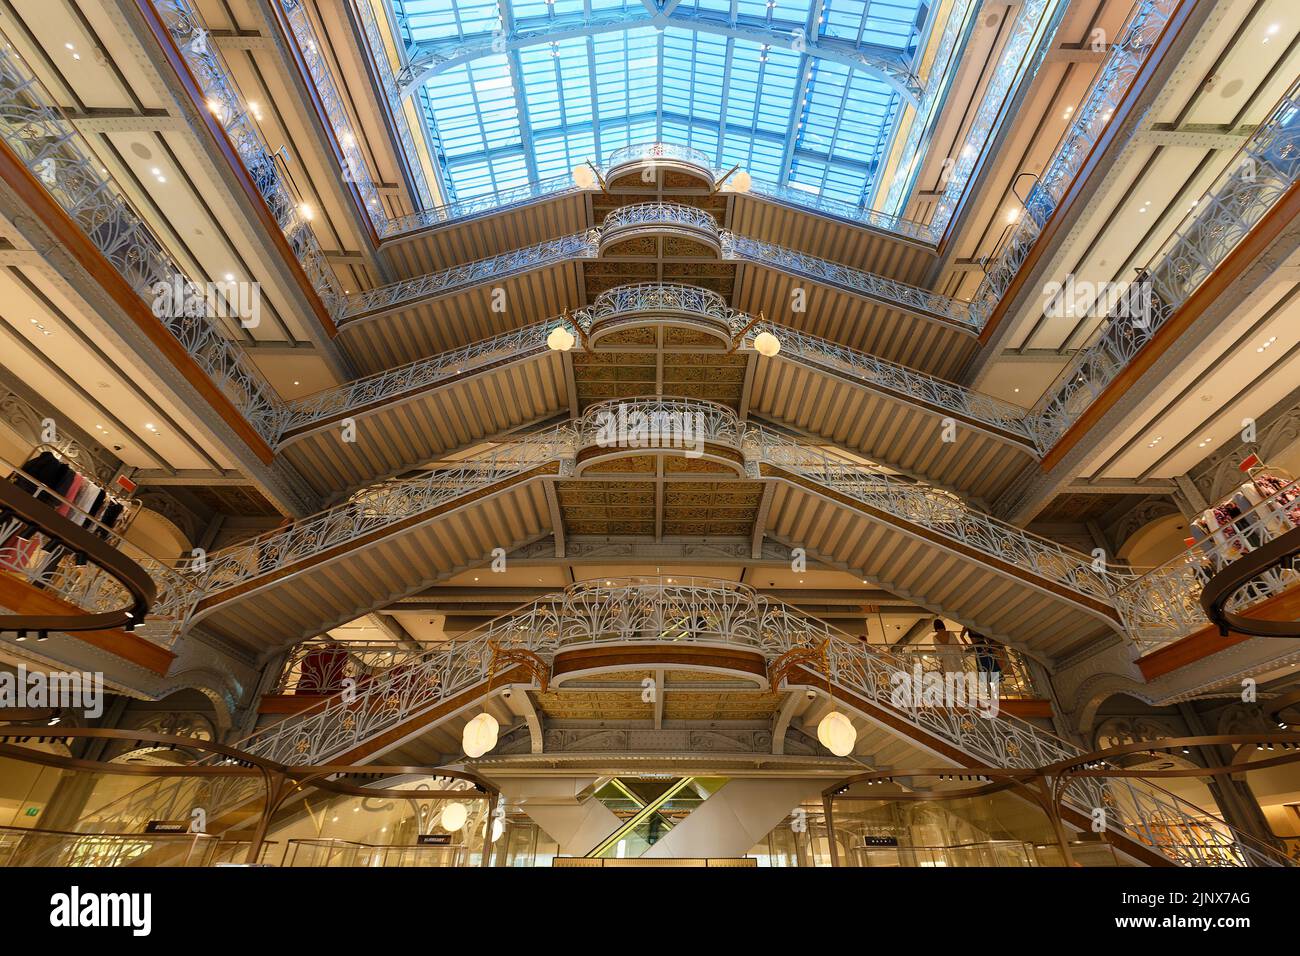 La Samaritaine is a Large Department Store in Paris Editorial Photo - Image  of droite, french: 159741836